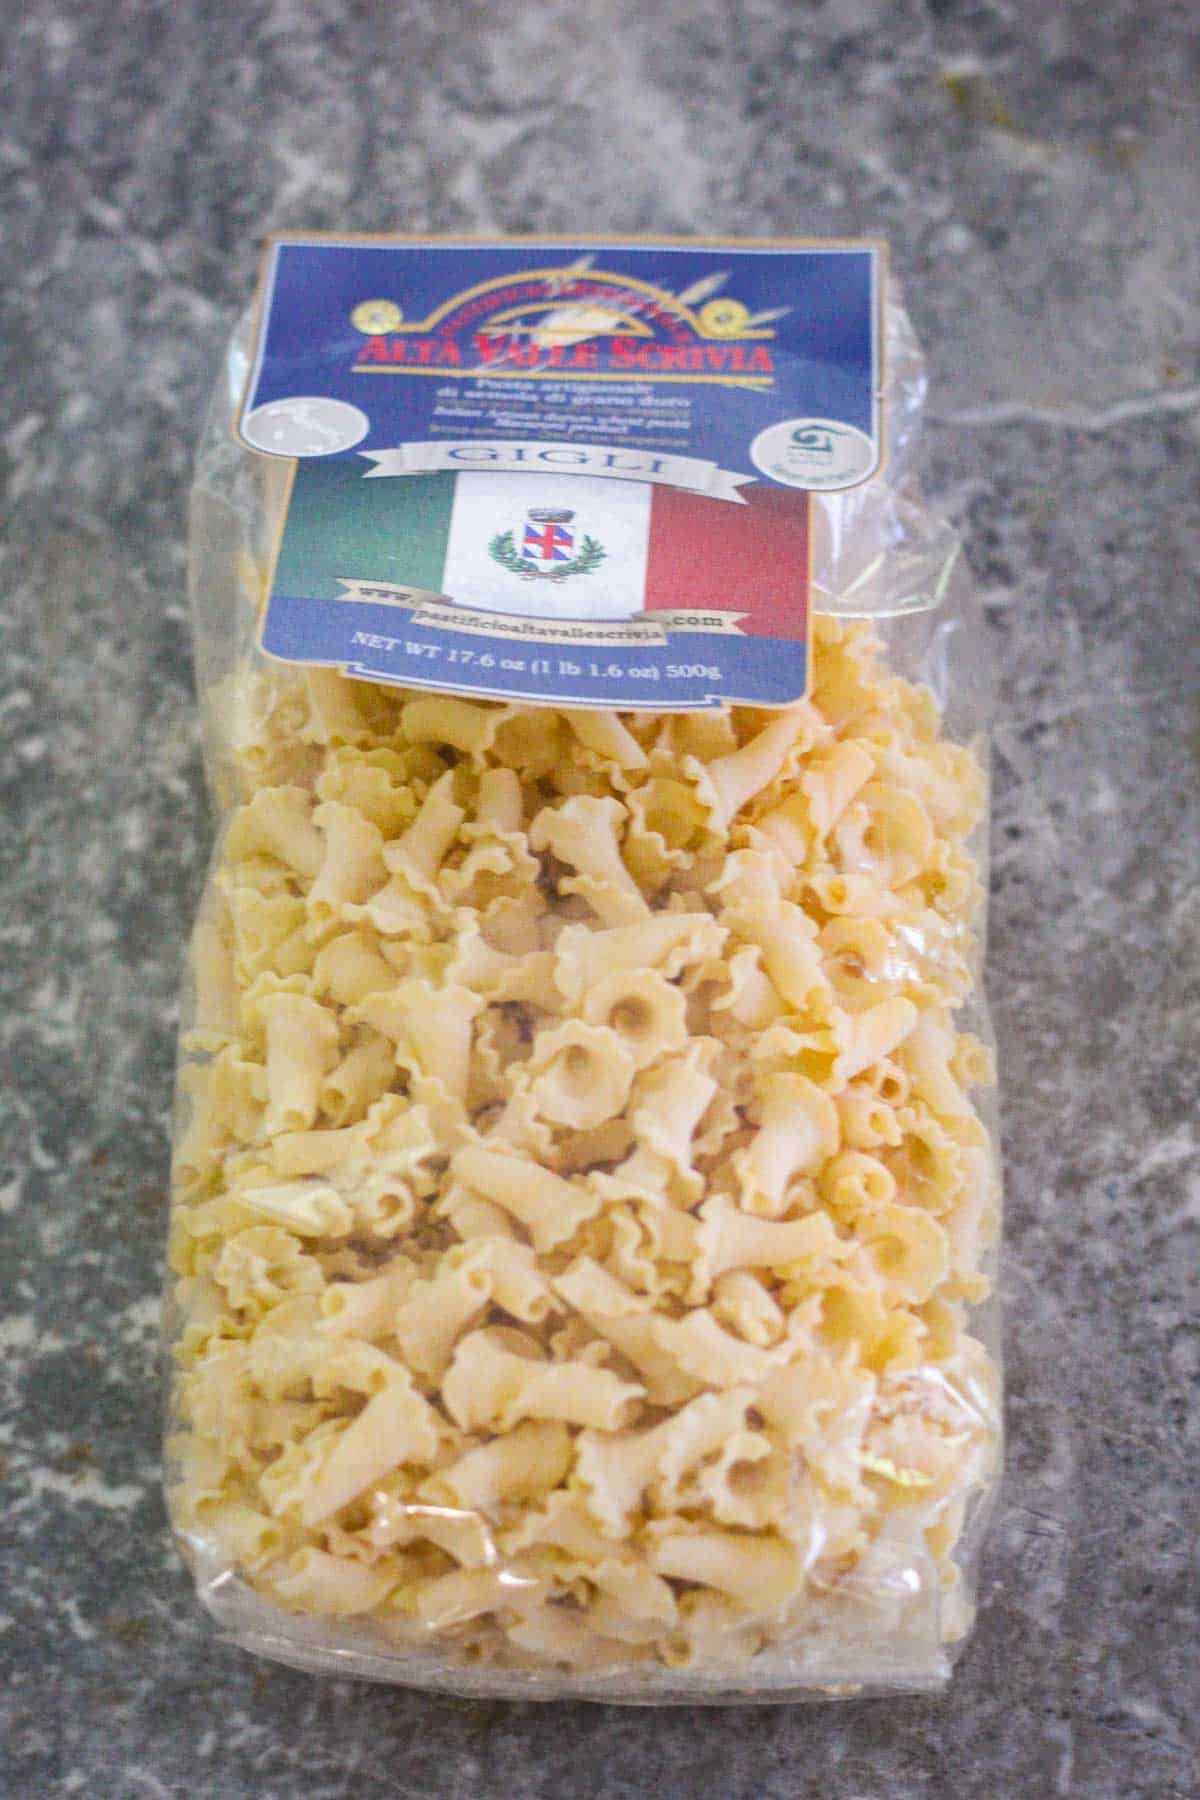 A package of gigli pasta.